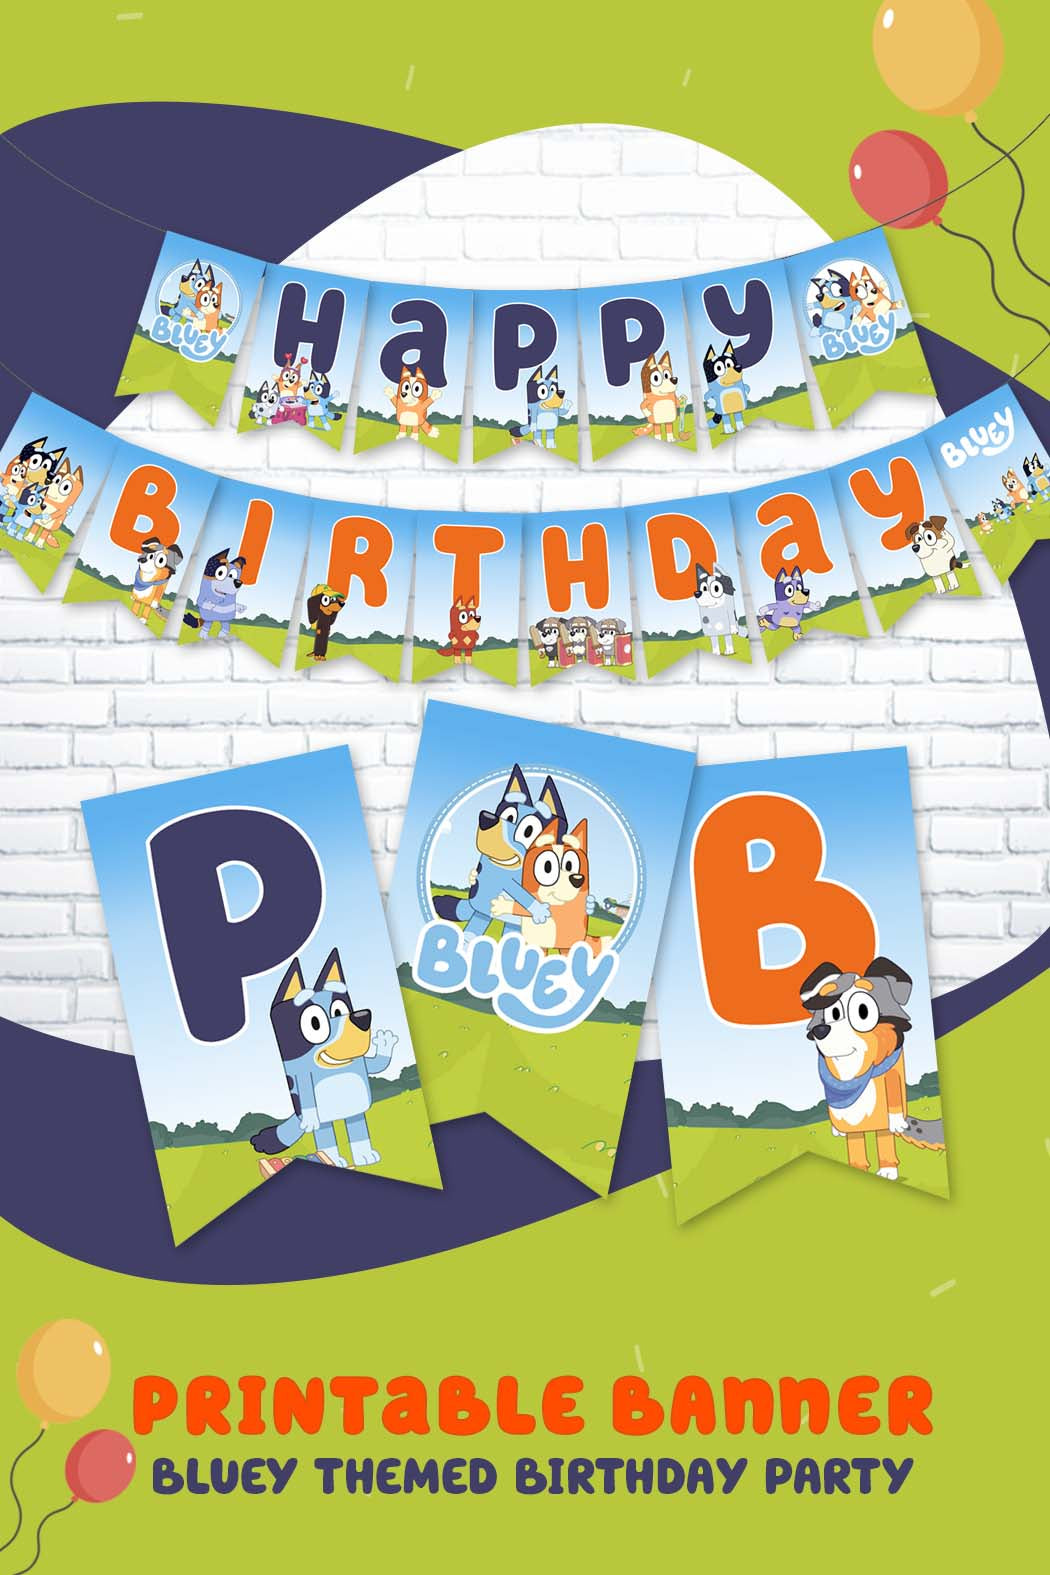 Peter Happy Birthday Banner Pennant - Rabbit Birthday Decorations - Peter  Party Supplies - Blue